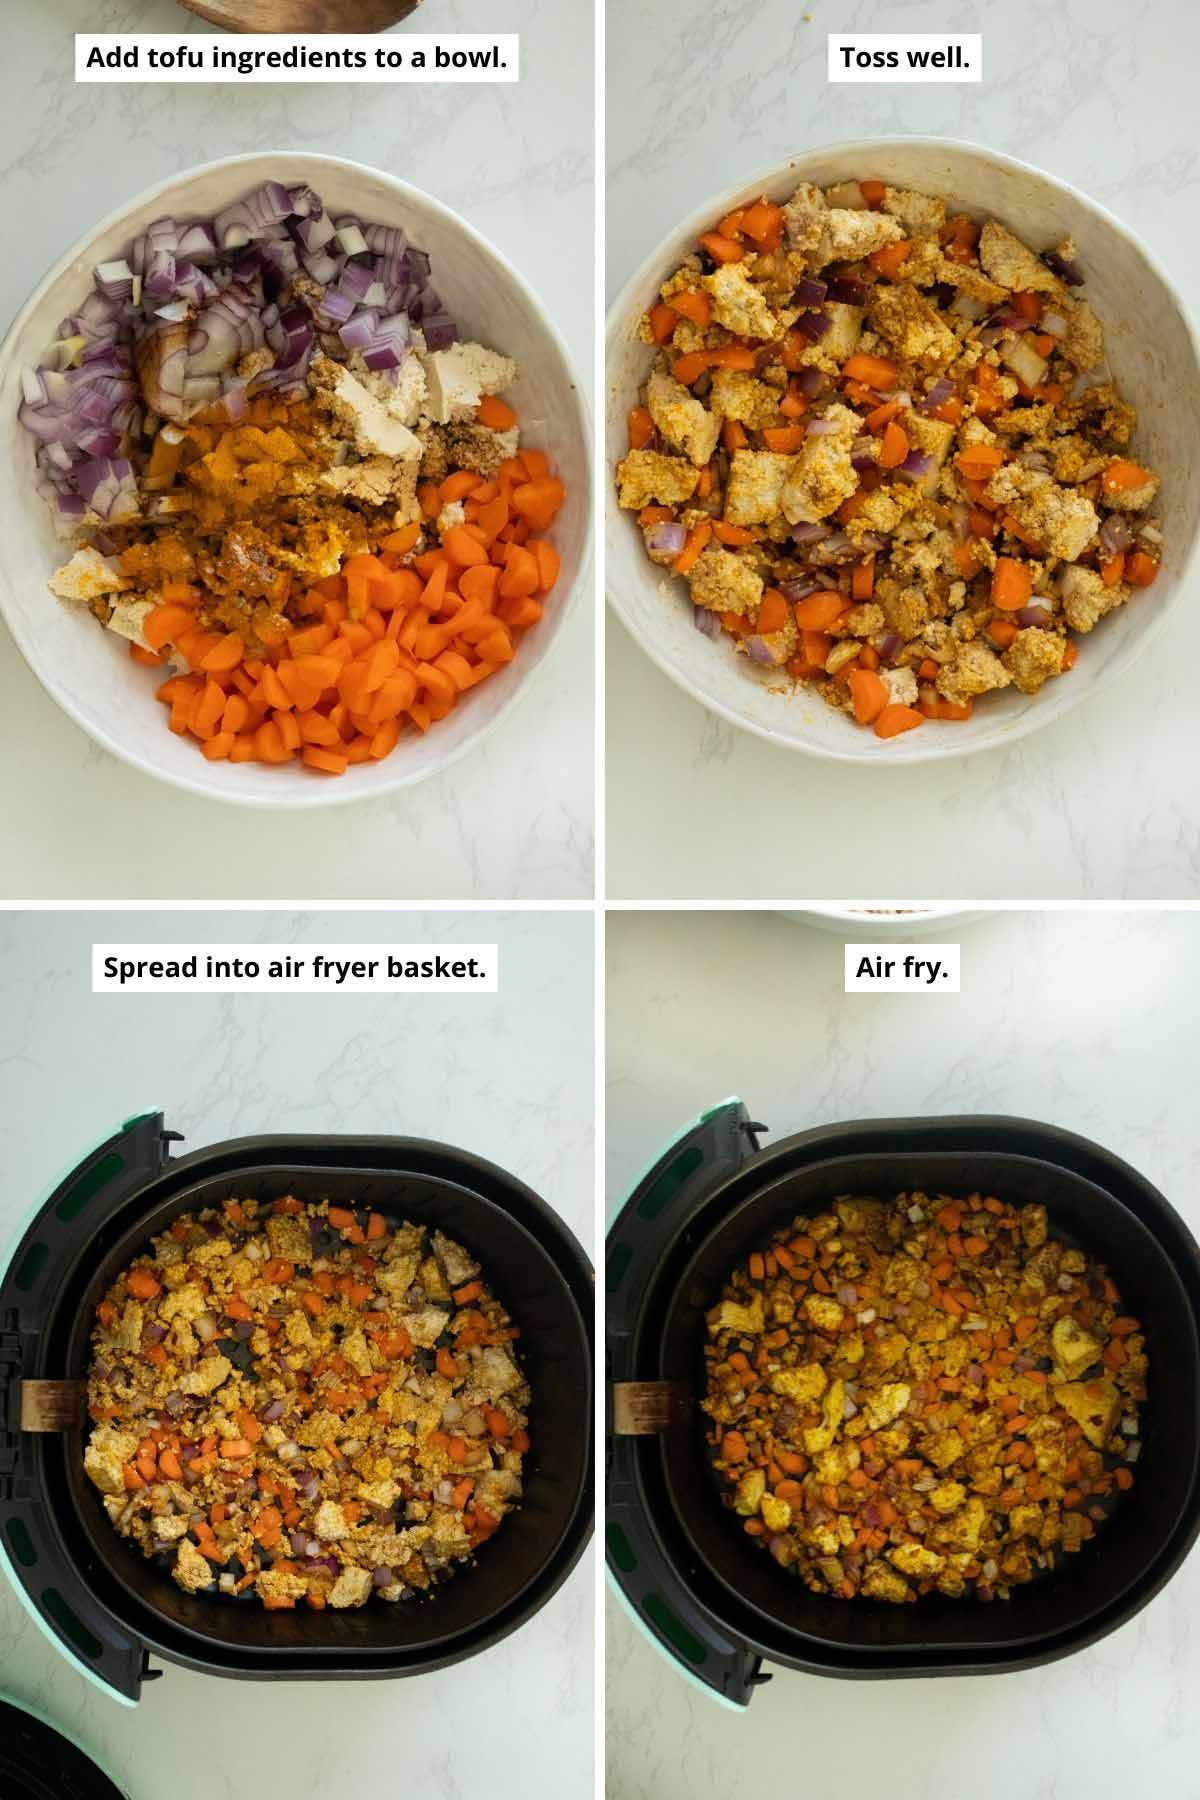 image collage showing mixing the eggy tofu and the tofu mixture in the air fryer basket before and after cooking